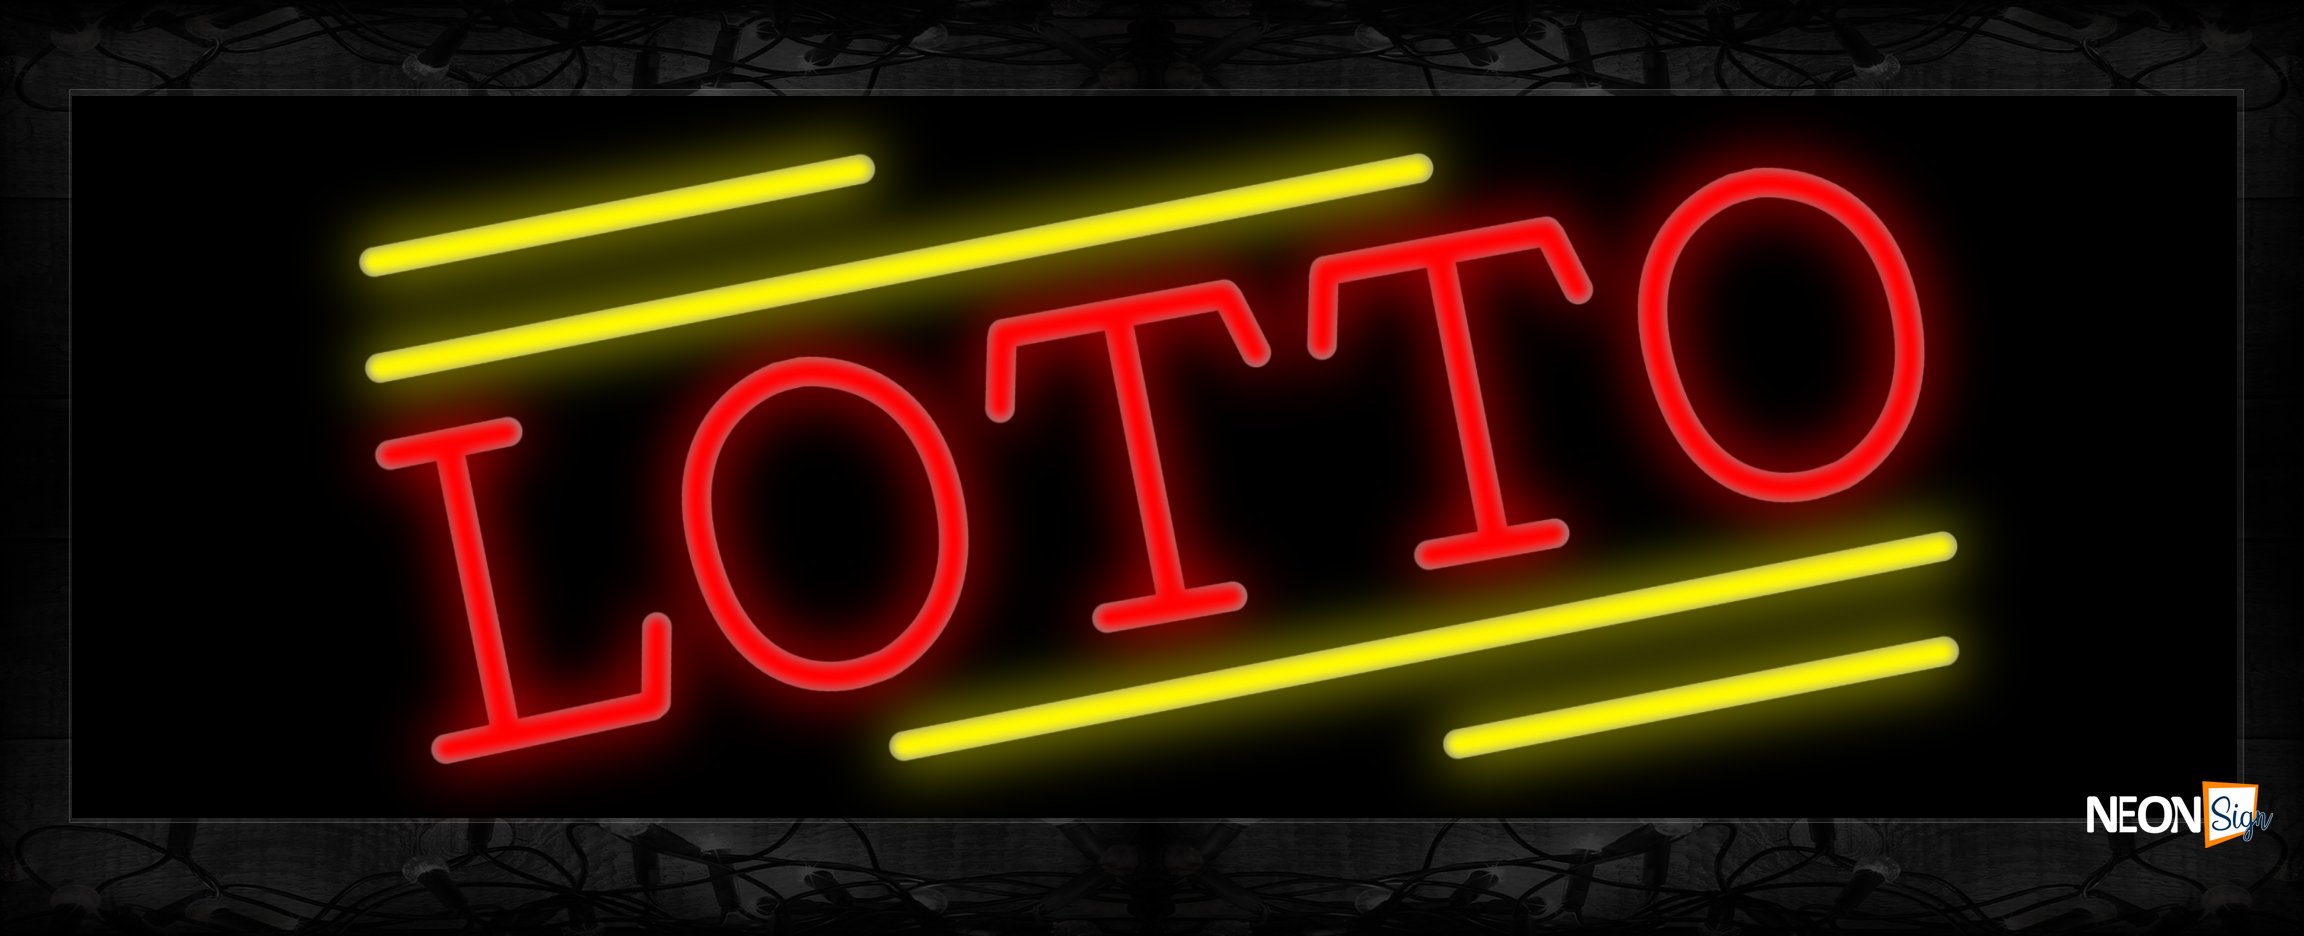 Image of 10827 Lotto with line Neon Sign 13x32 Black Backing